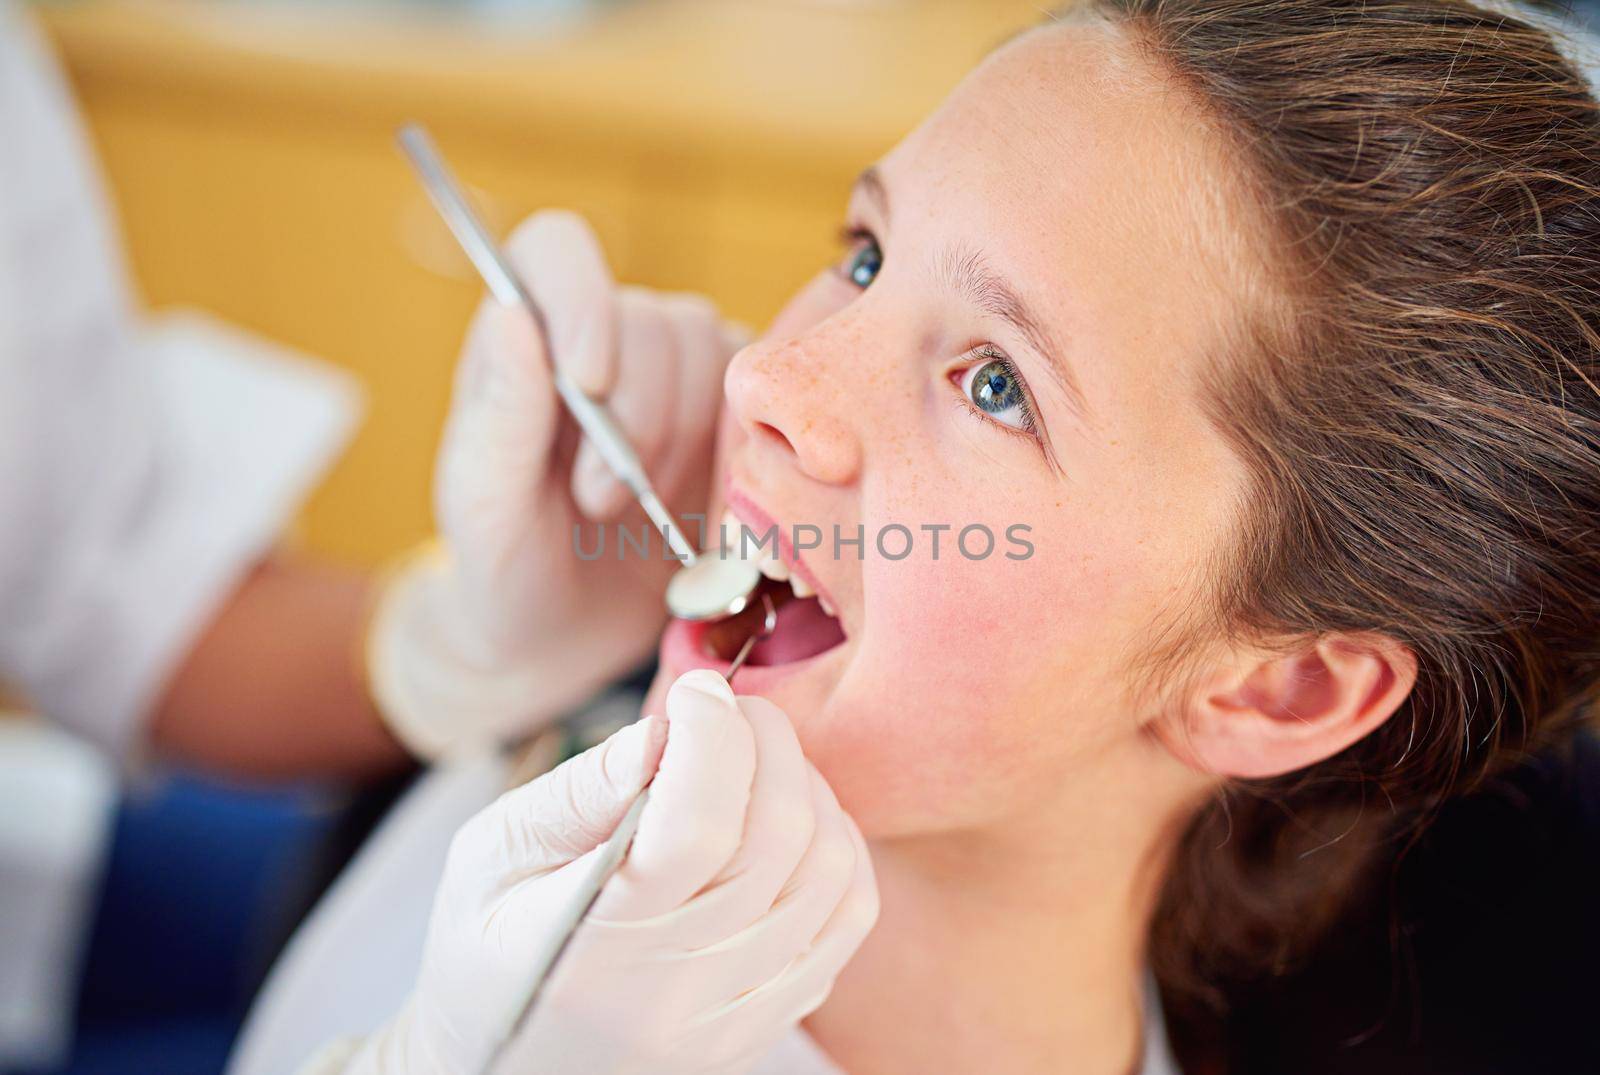 Shot of a female dentist and child in a dentist office.